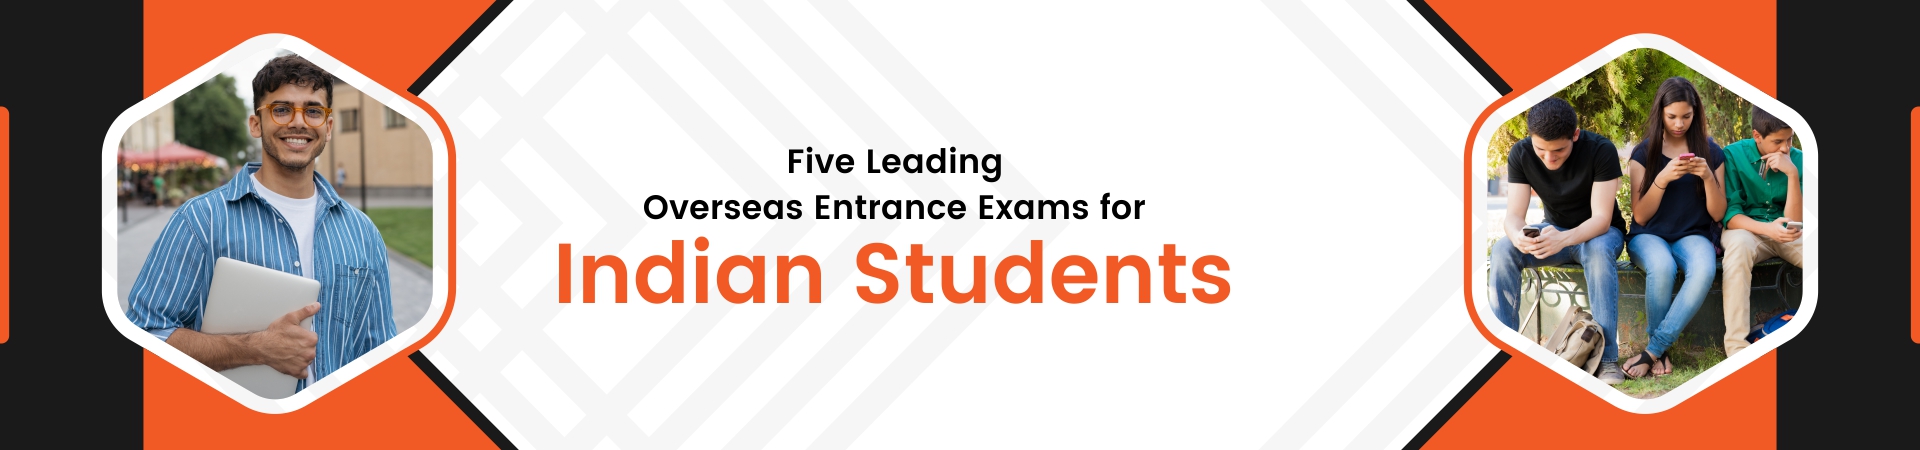 Five Leading Overseas Entrance Exams for Indian Students